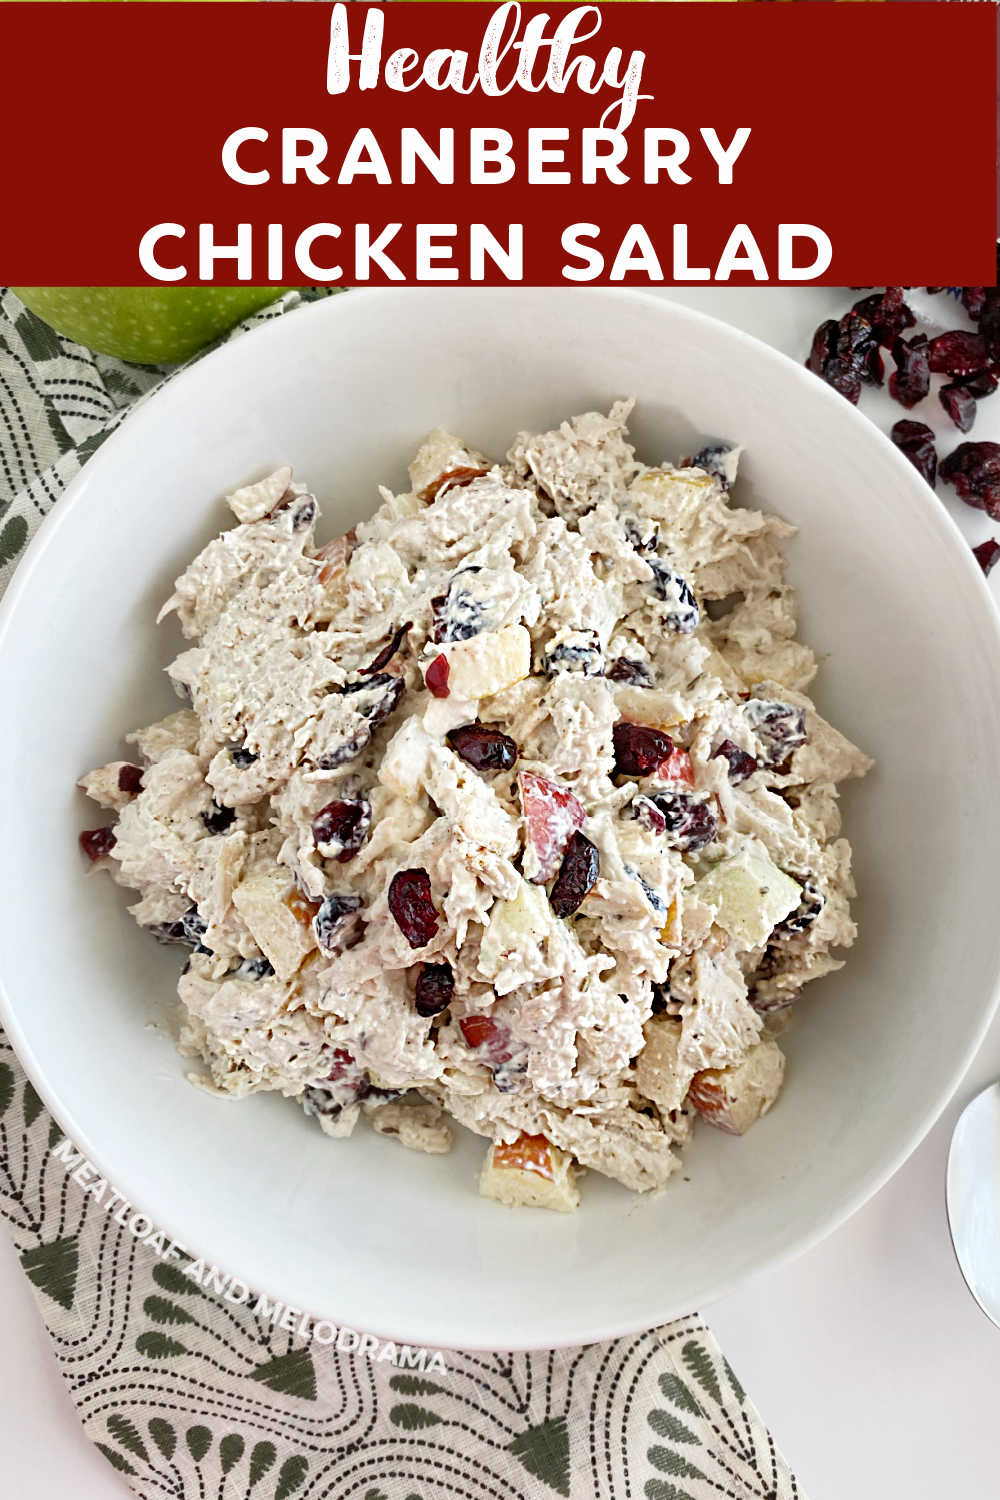 Cranberry Chicken Salad with Apples is loaded with tender chicken, crisp apples and tart dried cranberries in a light creamy dressing. Enjoy this healthy chicken salad recipe in wraps, sandwiches or straight out of the bowl for a light lunch or dinner! via @meamel